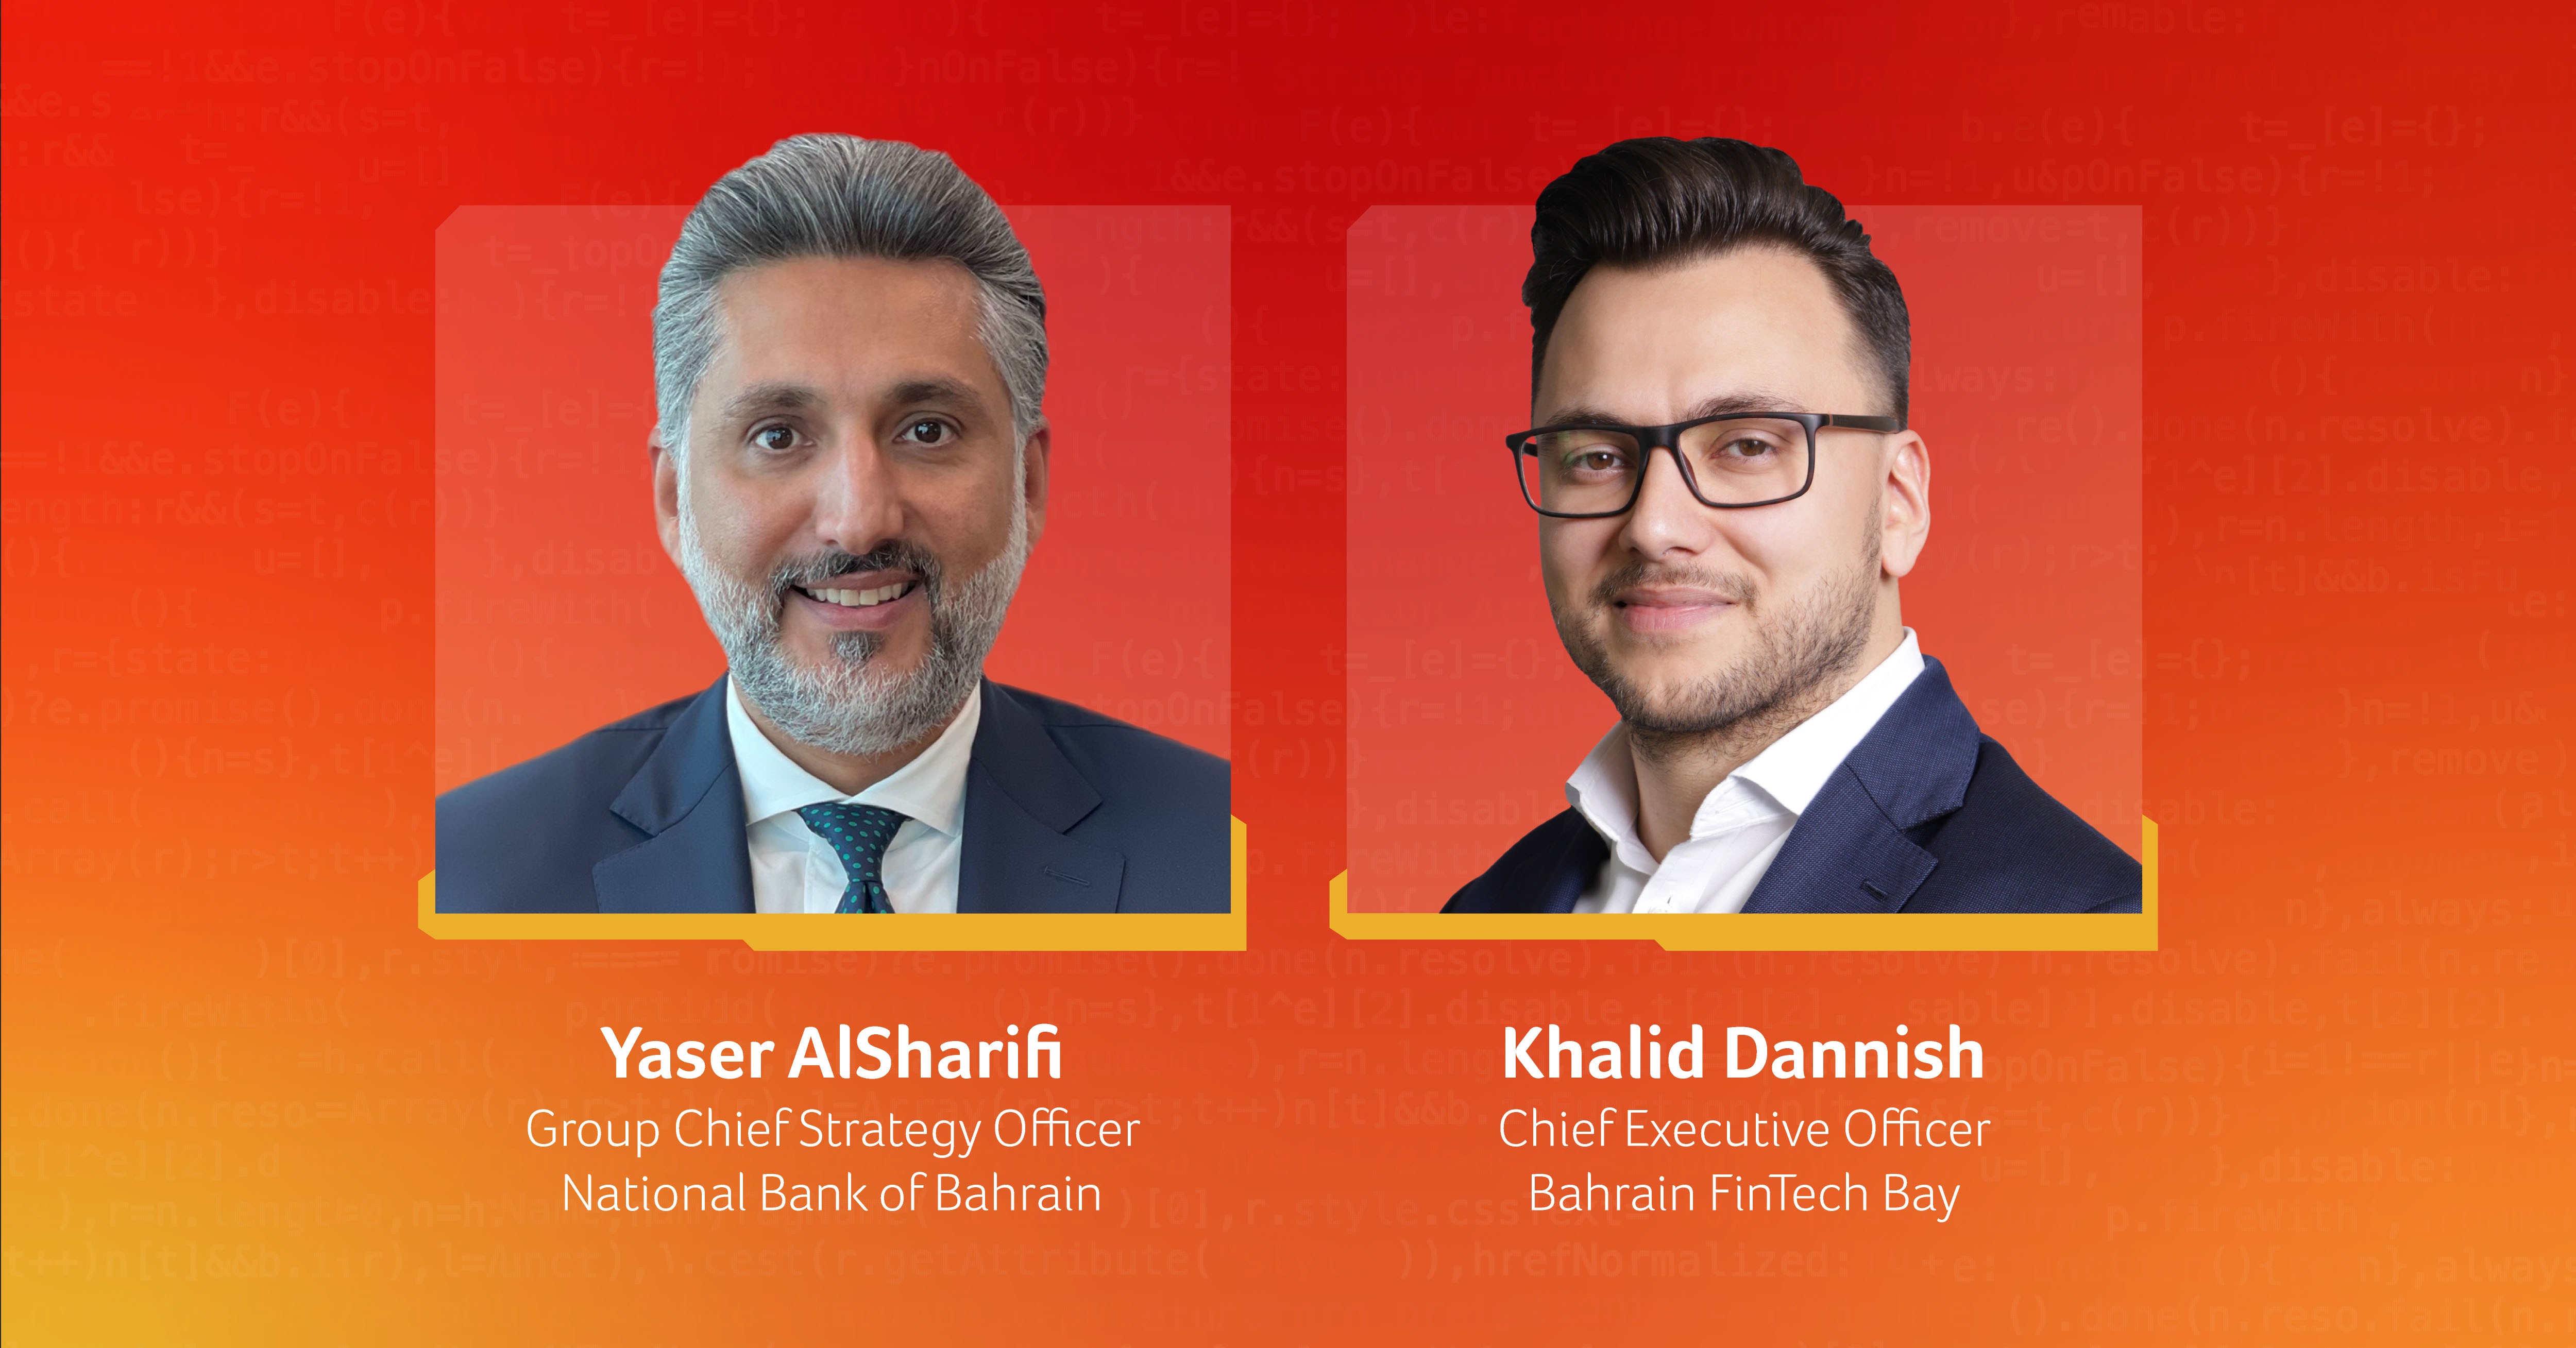 Digital Banking Challenge Launched to Upskill Bahraini Youth Digital Capabilities 